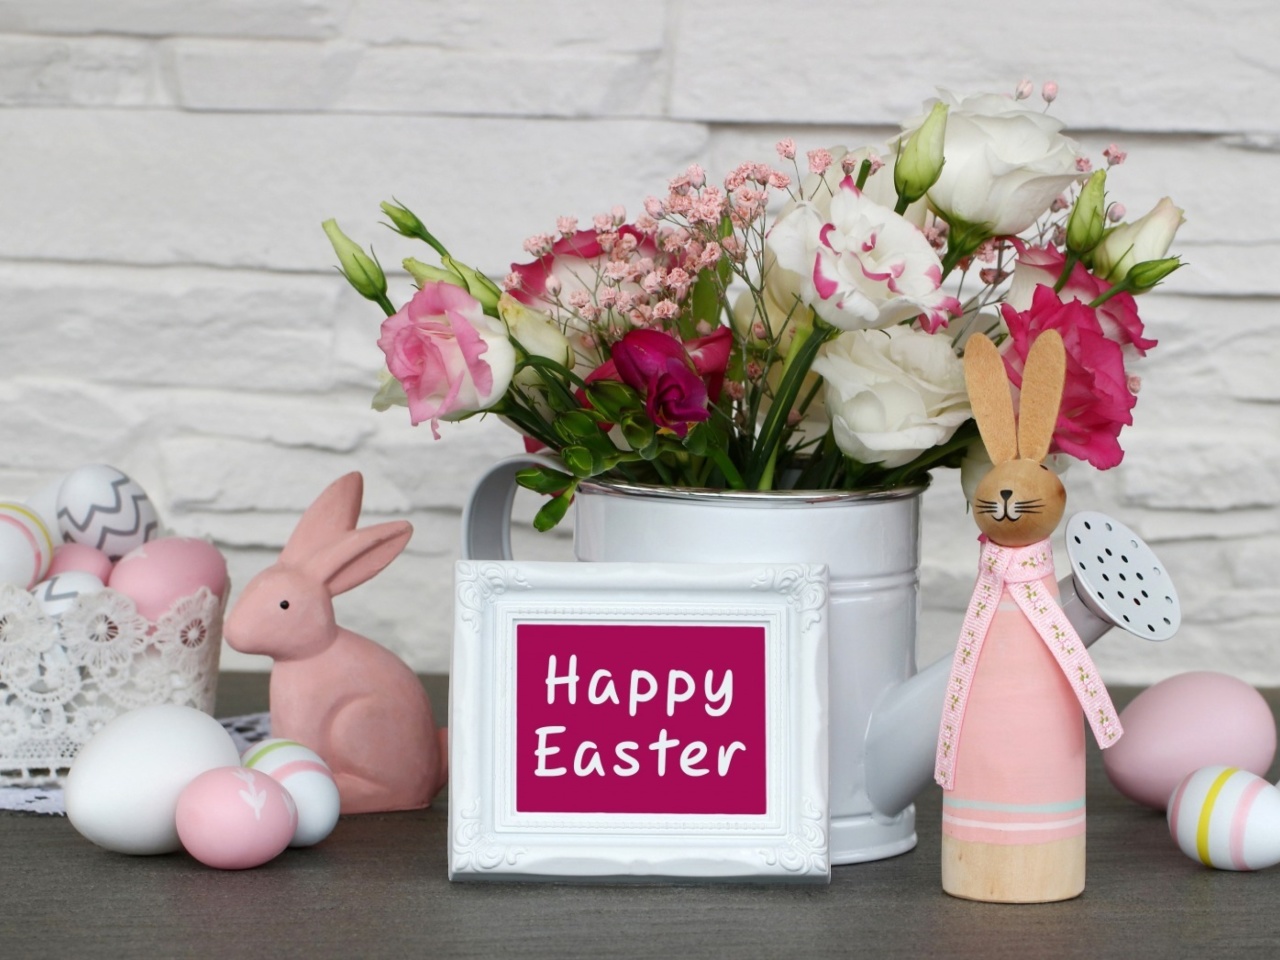 Happy Easter with Hare Figures wallpaper 1280x960